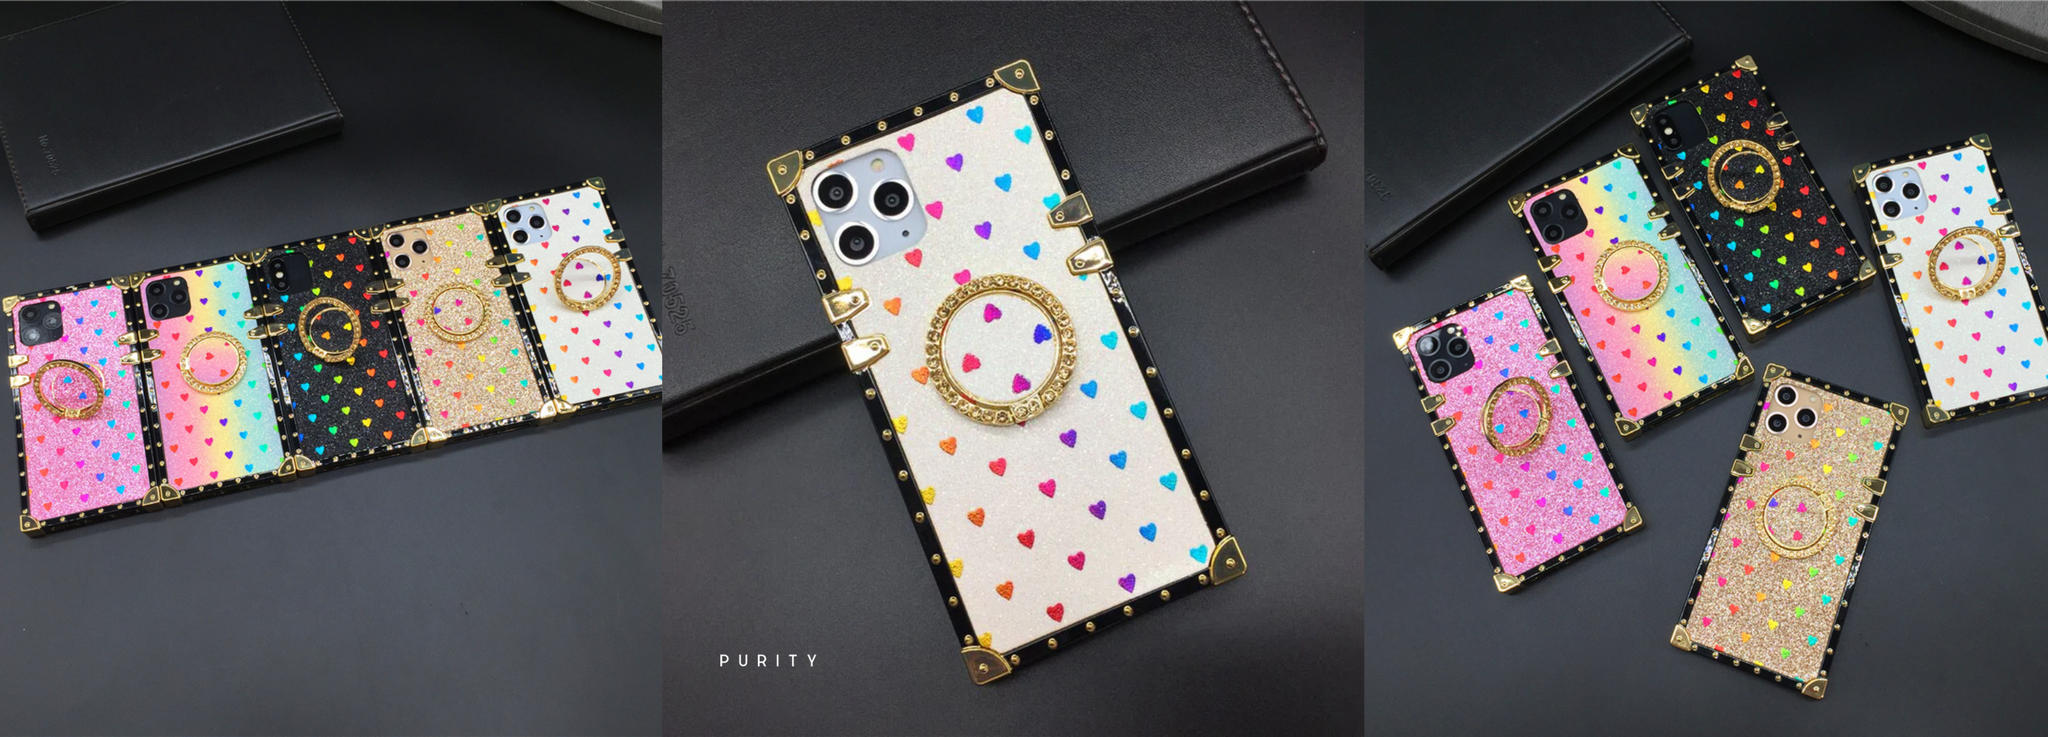 White Phone Case with Hearts | "Devotion" Phone Case by PURITY